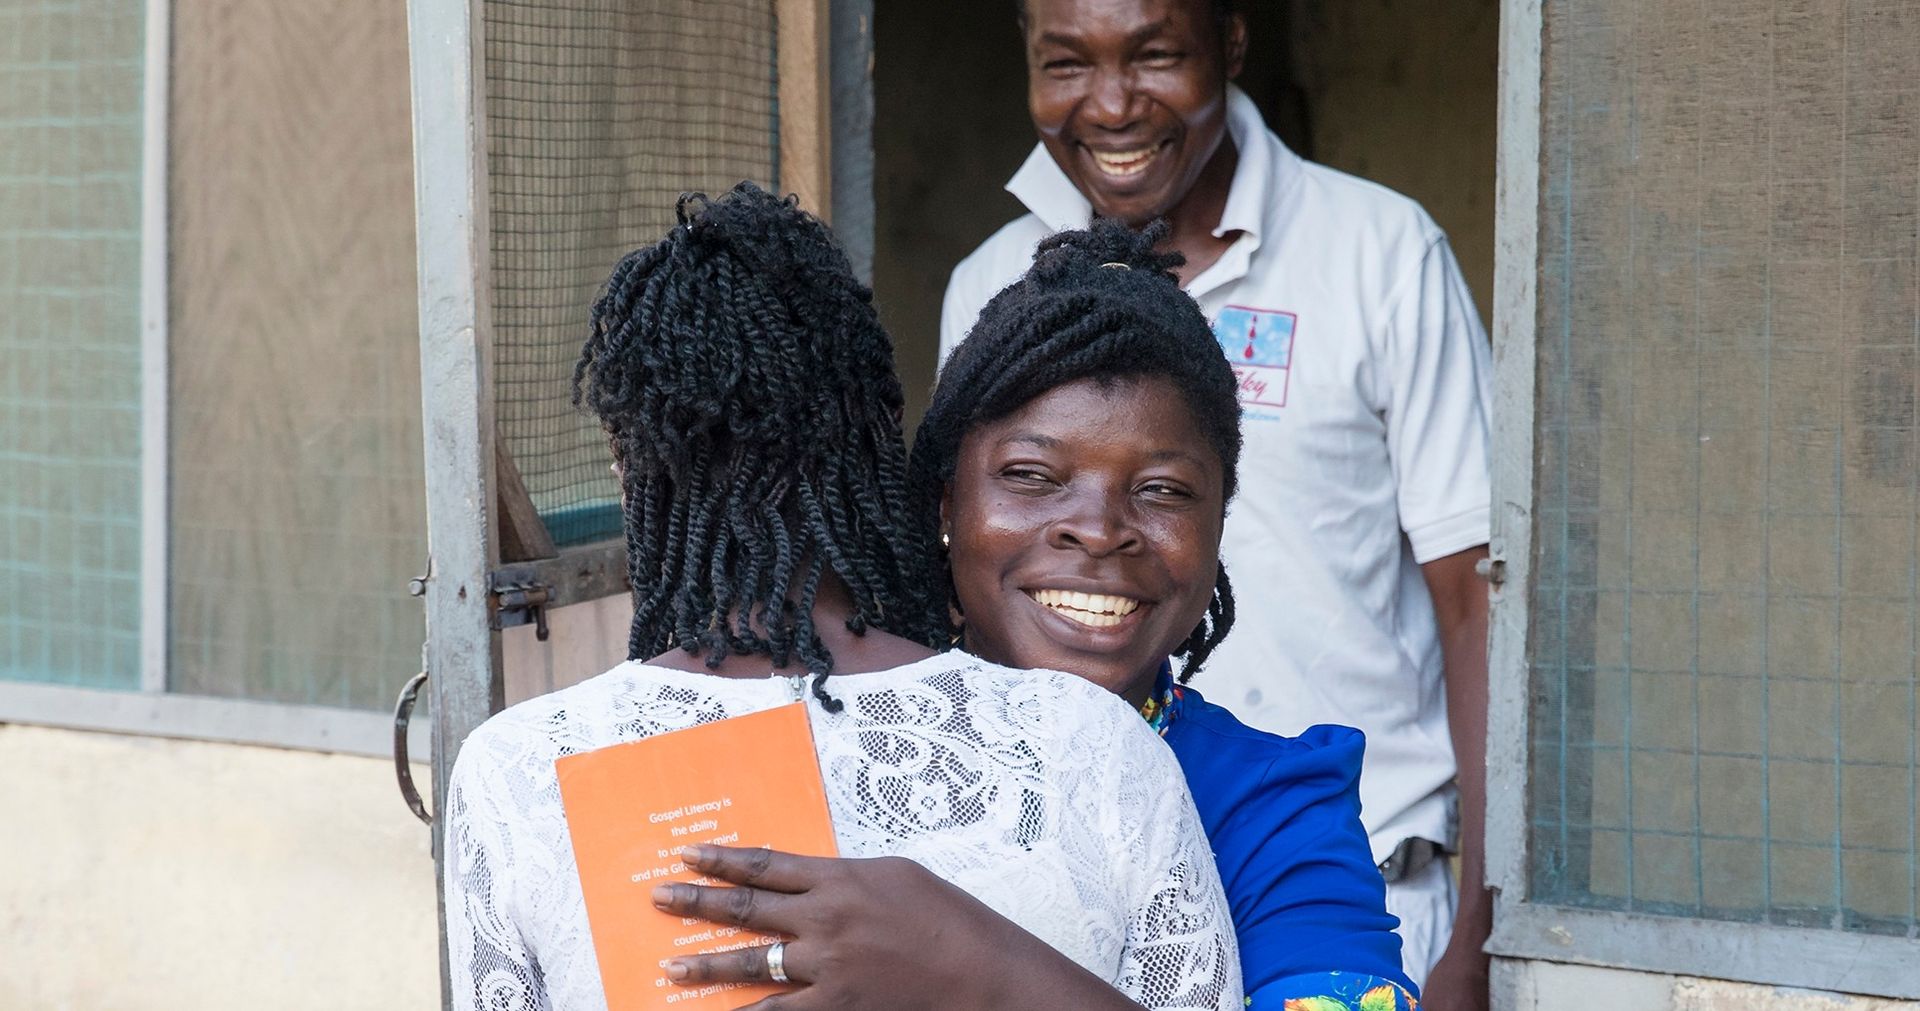 Two Ghanaian women embrace. A Ghanaian man smiles in the background.